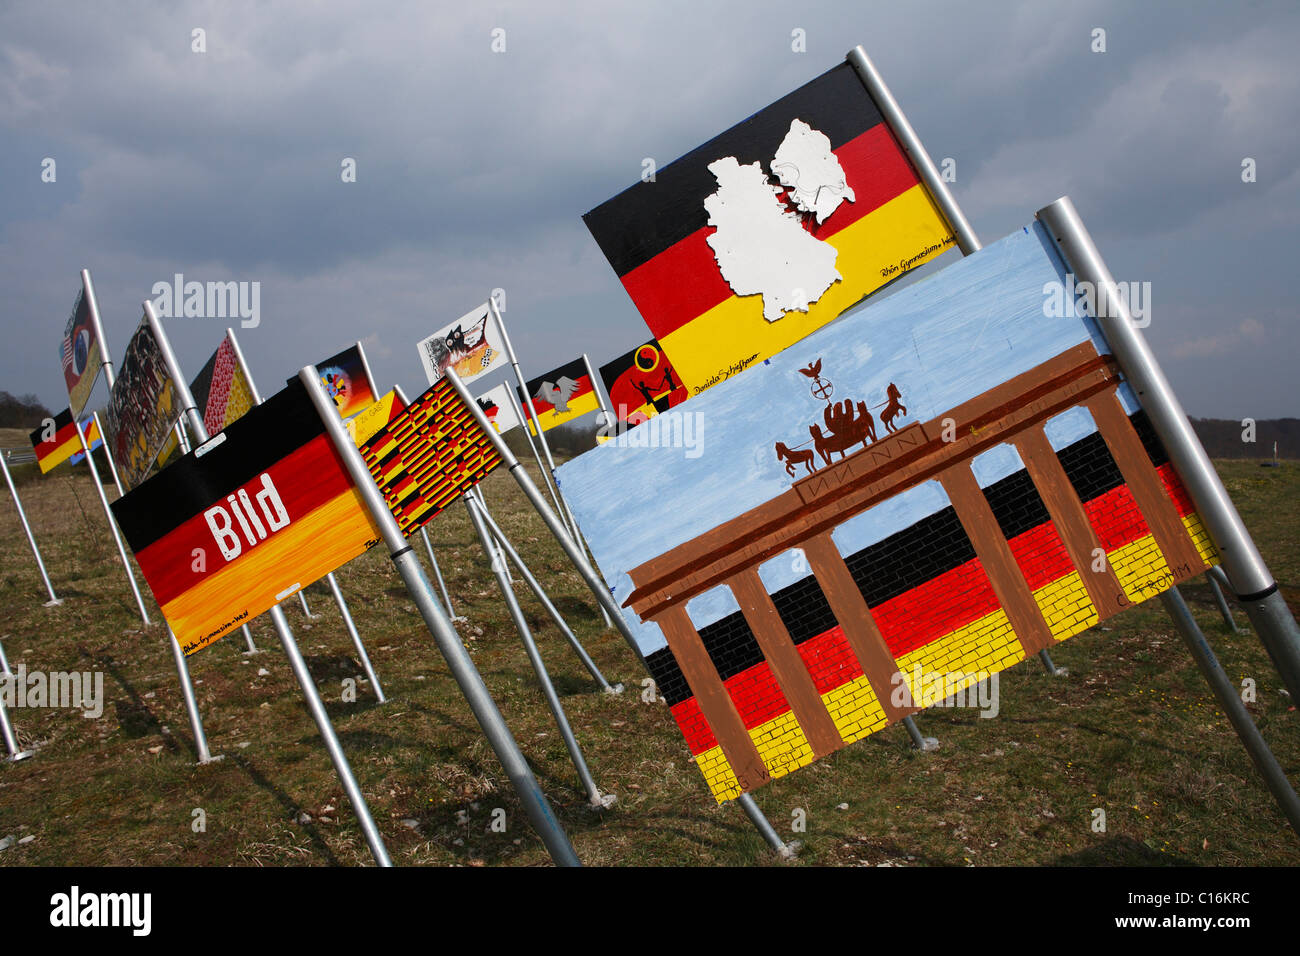 Field of flags, 'Sculpture park' national monument to German unity on the Thuringian/Bavarian border near to Henneberg Stock Photo